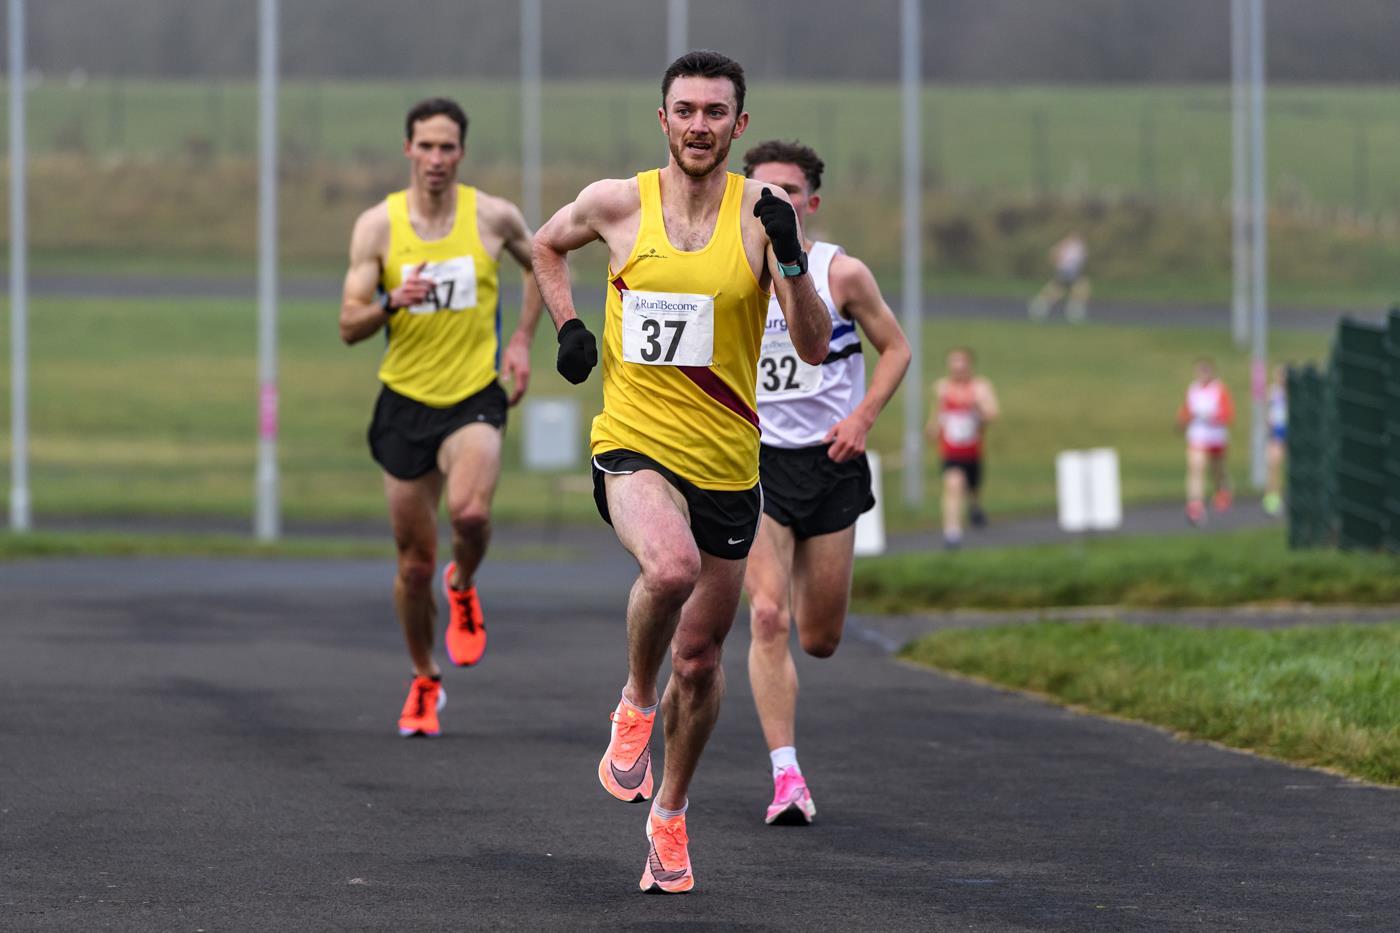 Sean Chalmers, Aberdeen-based member of Inverness Harriers, ran fastest 5k of his career at the Run and Become Sri Chinmoy Invitational 5k at the Fife Cycle Park near Lochgelly.